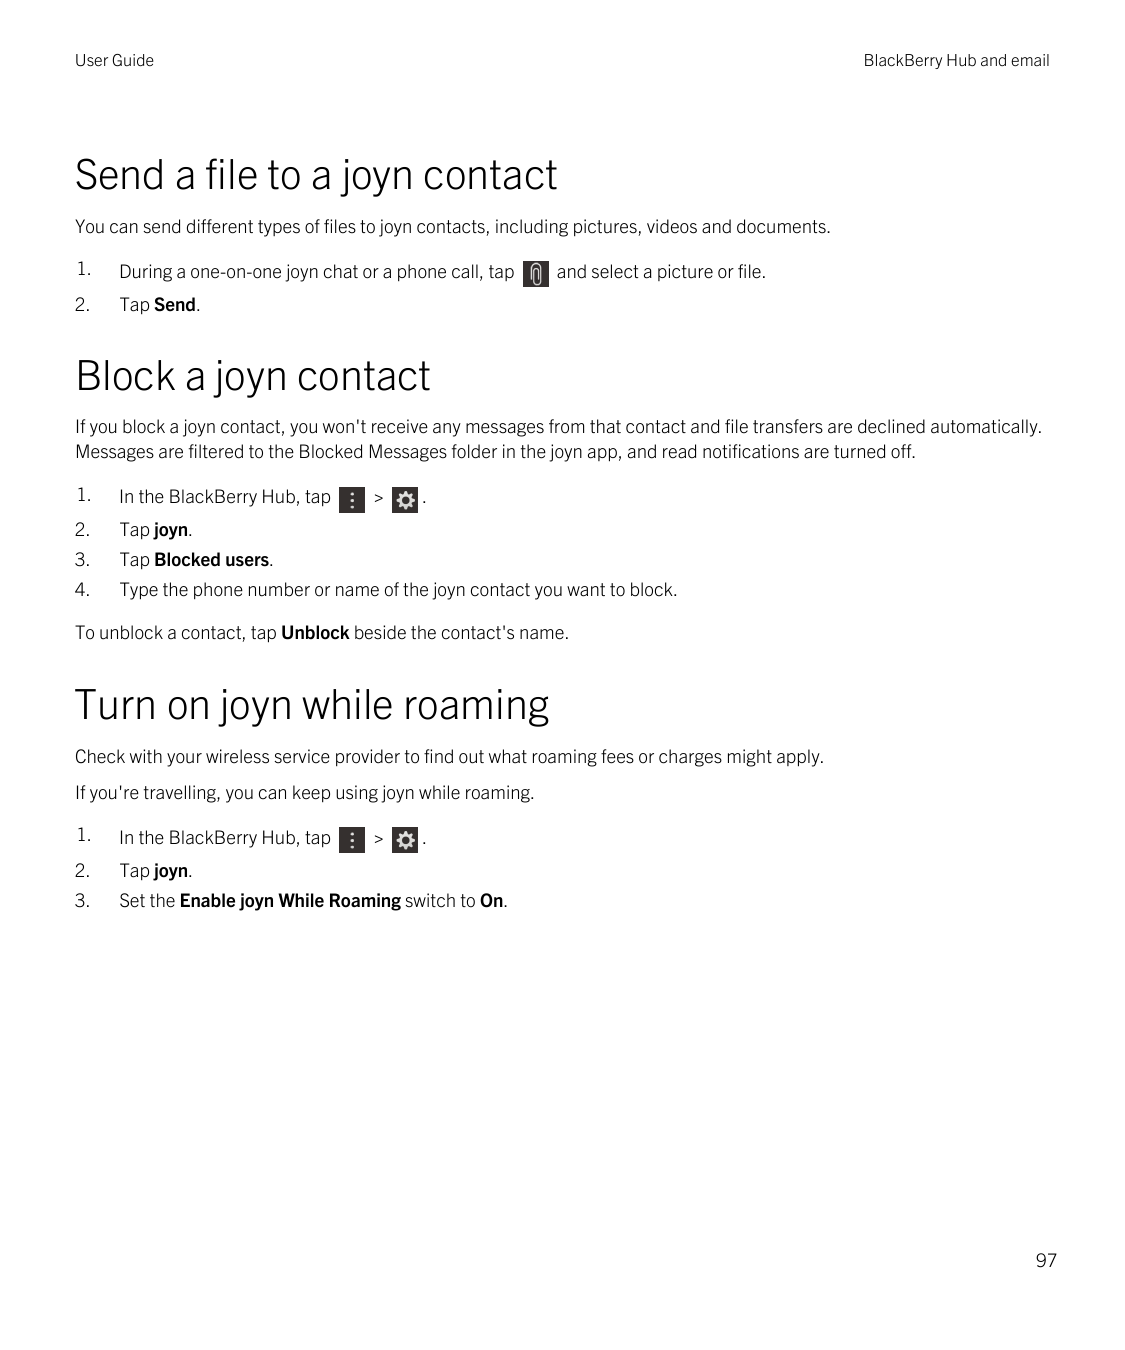 User GuideBlackBerry Hub and emailSend a file to a joyn contactYou can send different types of files to joyn contacts, including